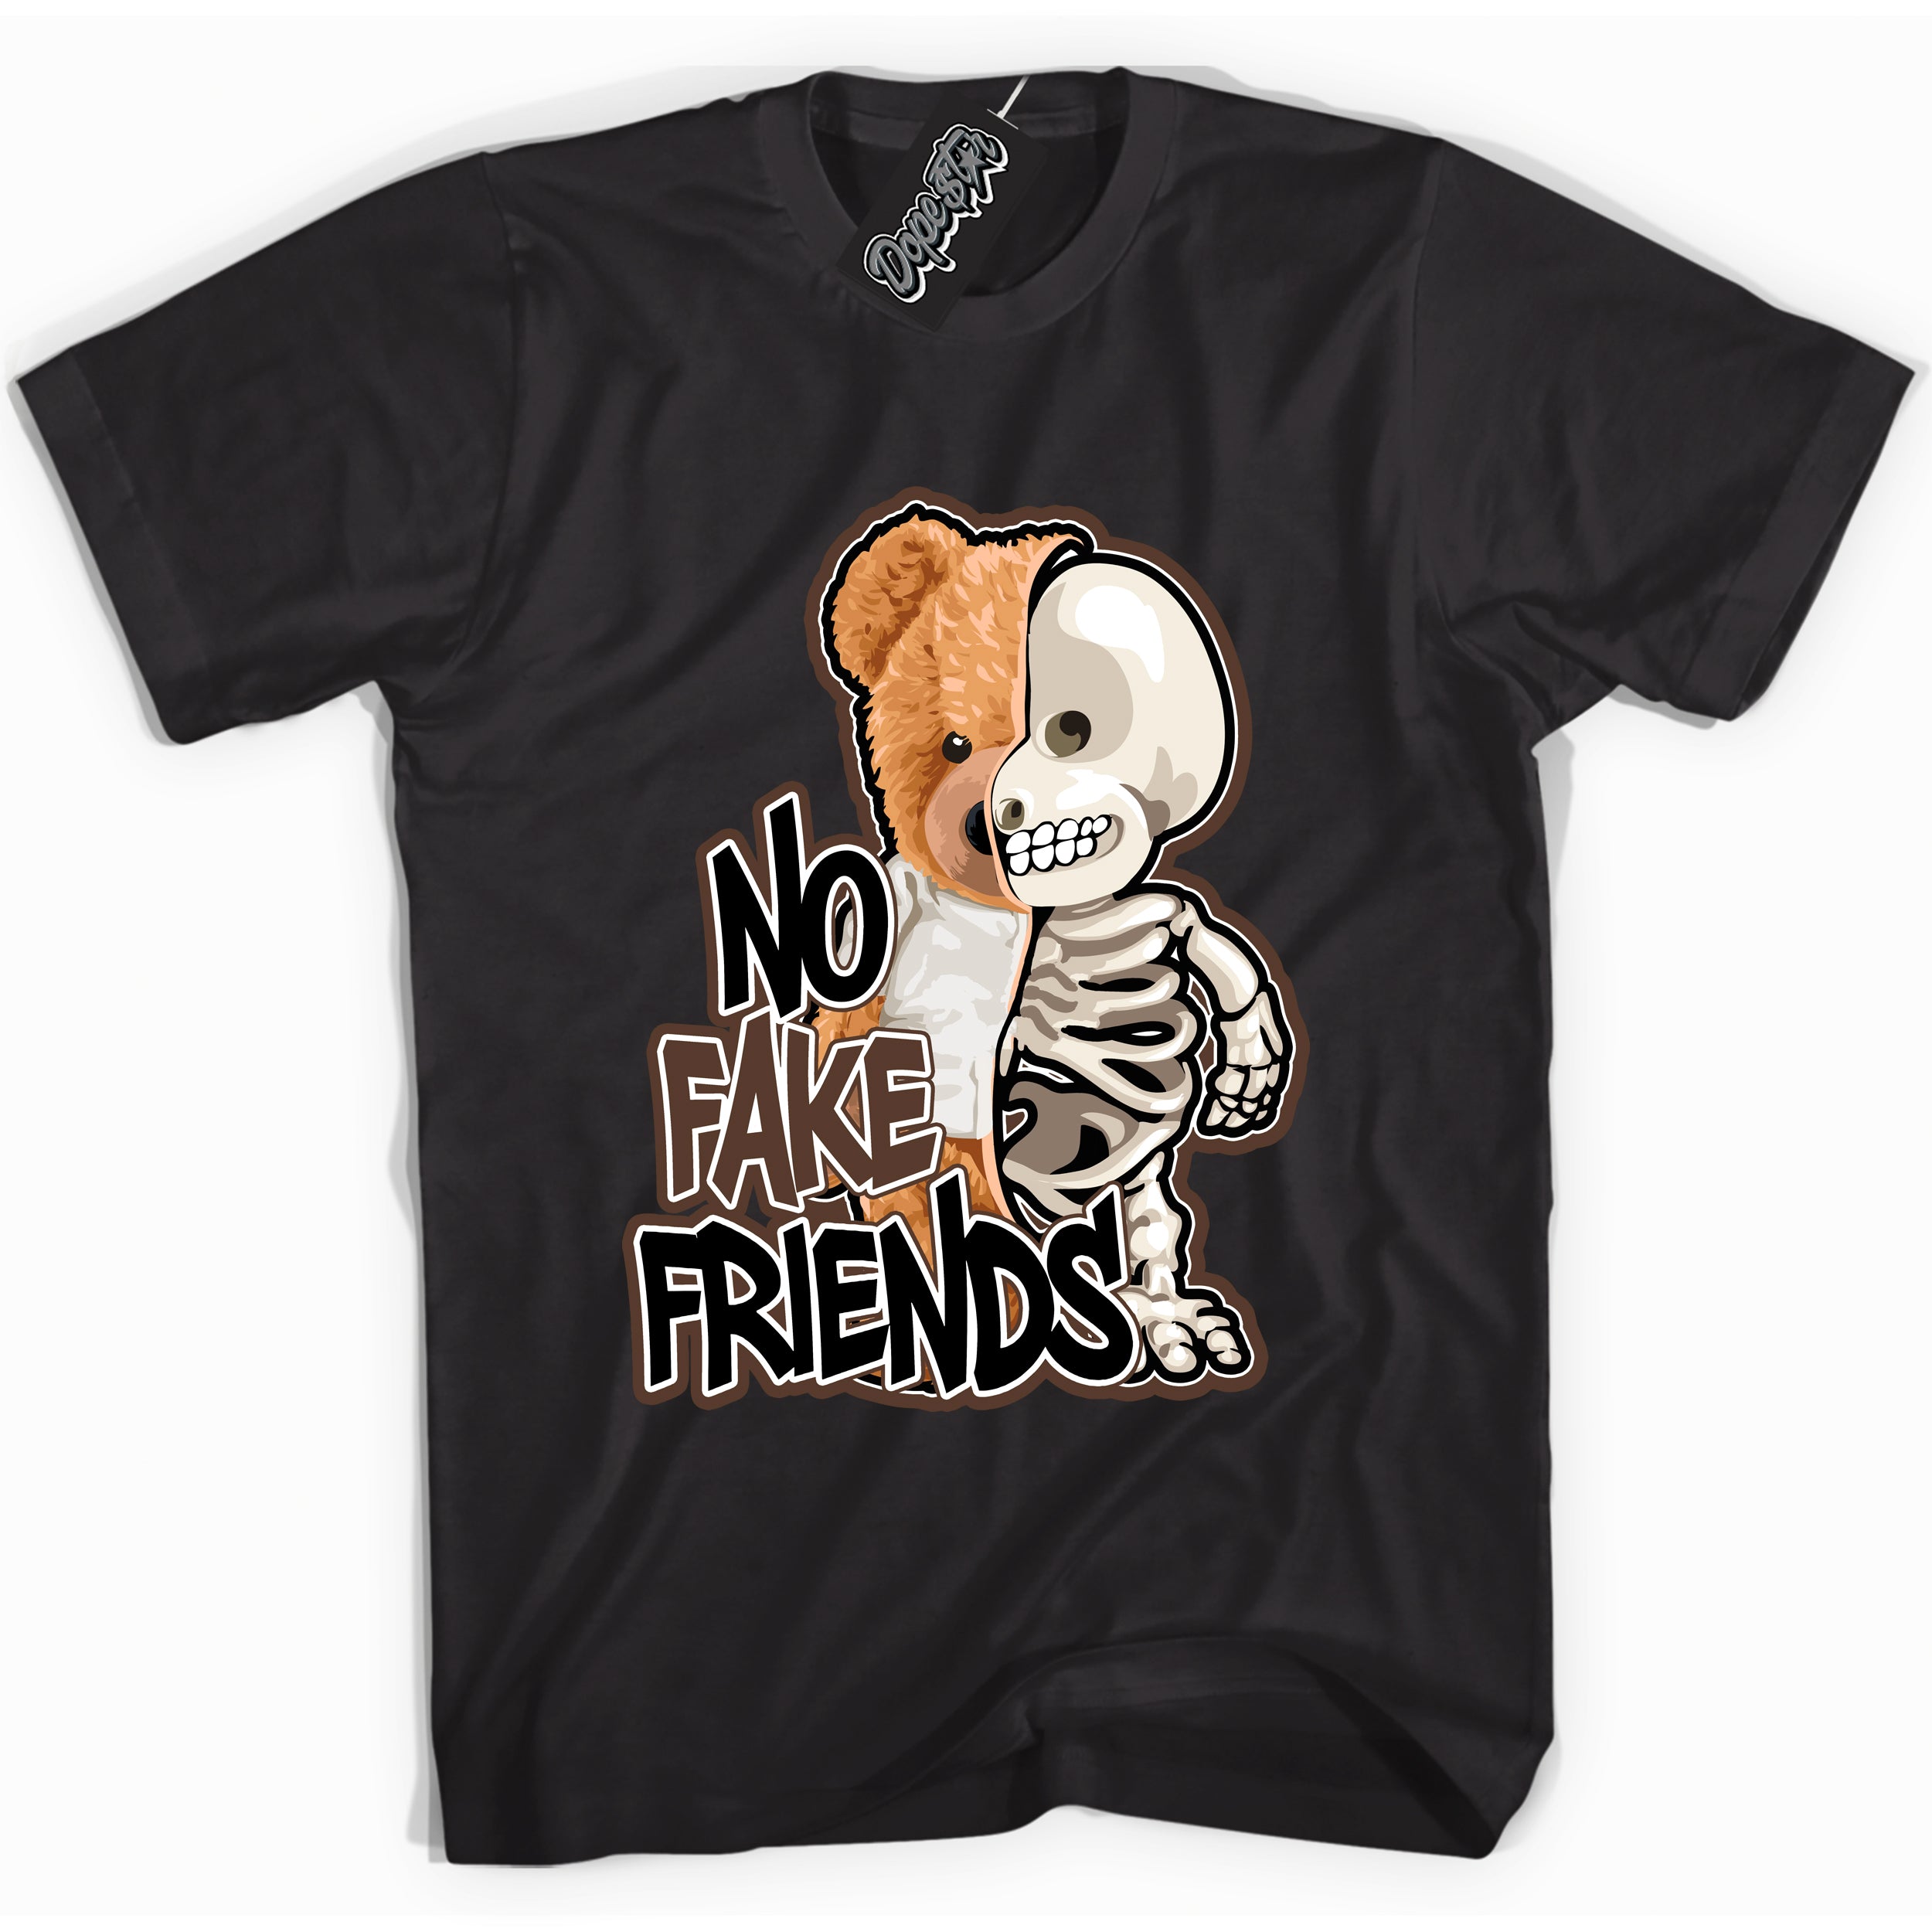 Cool Black graphic tee with “ No Fake Friends ” design, that perfectly matches Palomino 1s sneakers 